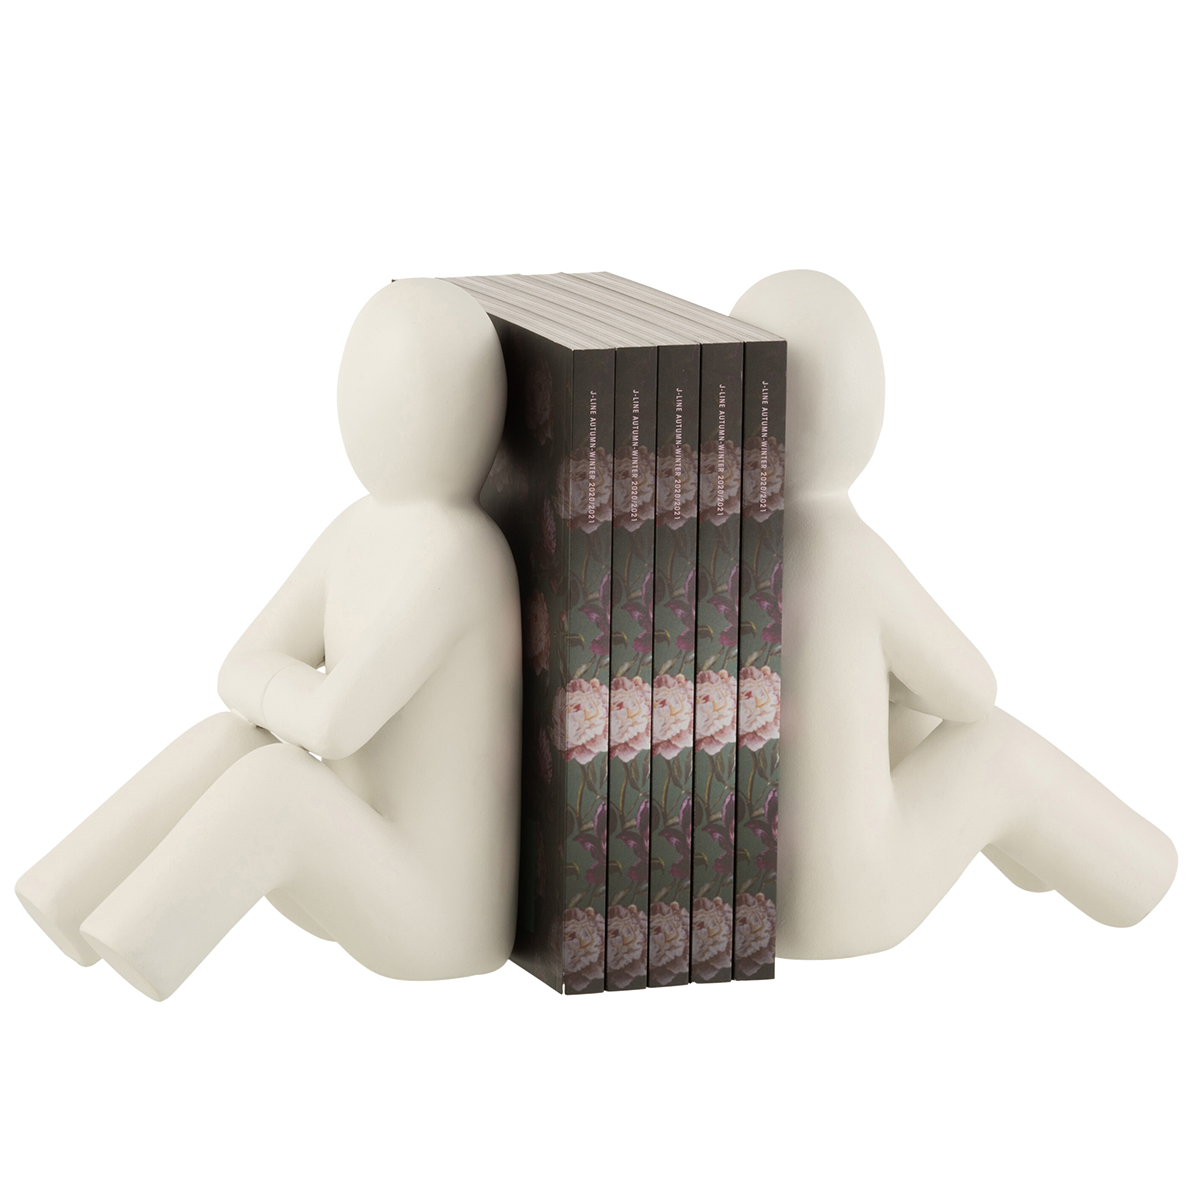 P'tit Maurice bookend in white resin